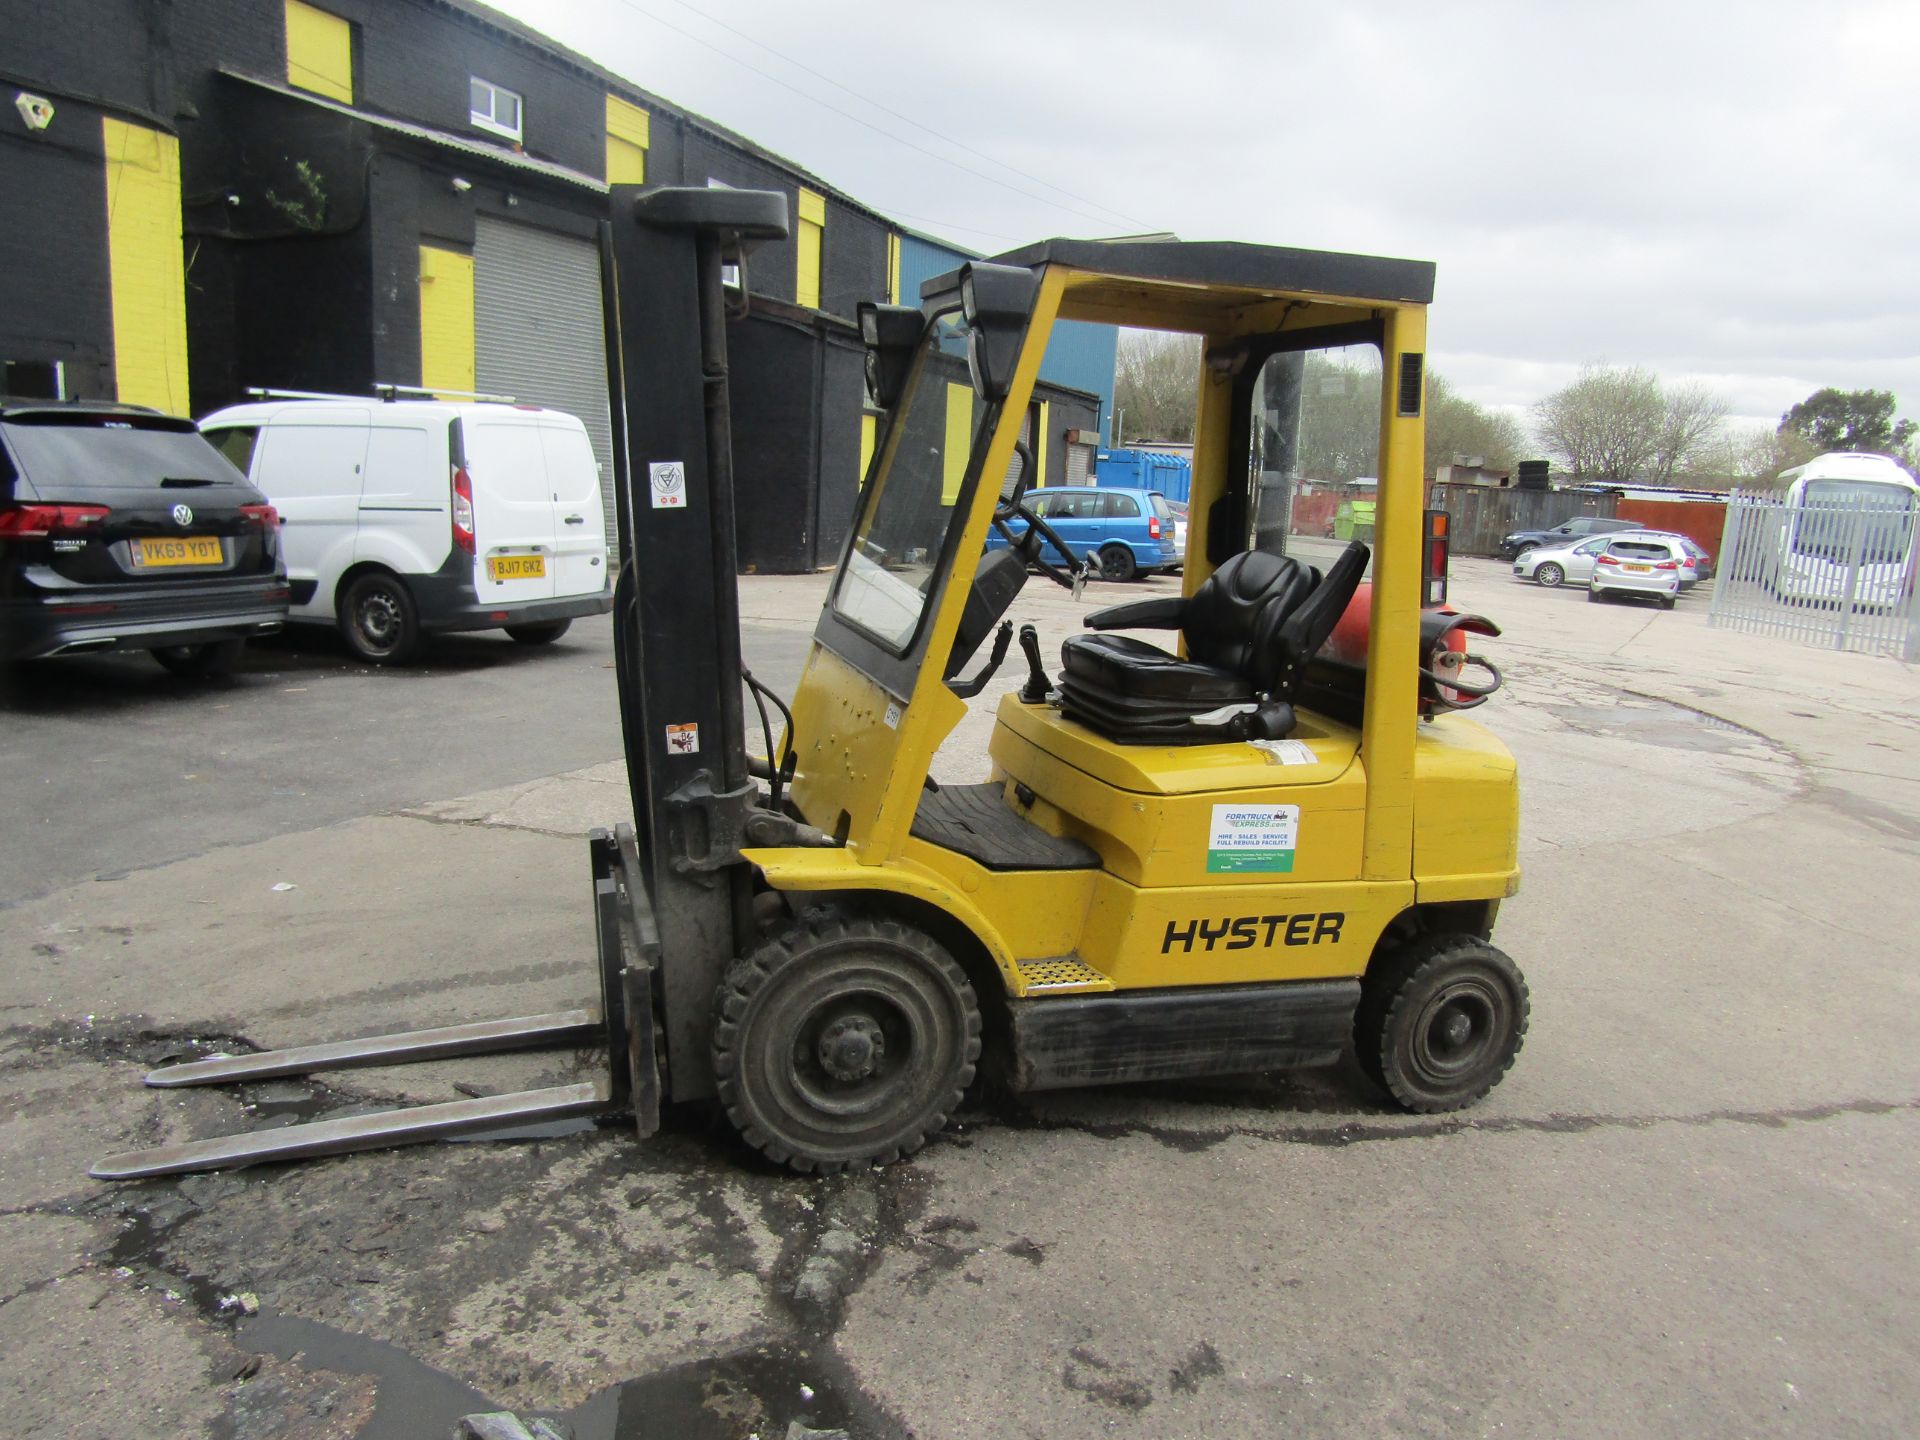 Hyster H2.00Xm Forklift Truck 7235 hours currently manufactured in 2004, has a roof as well as front